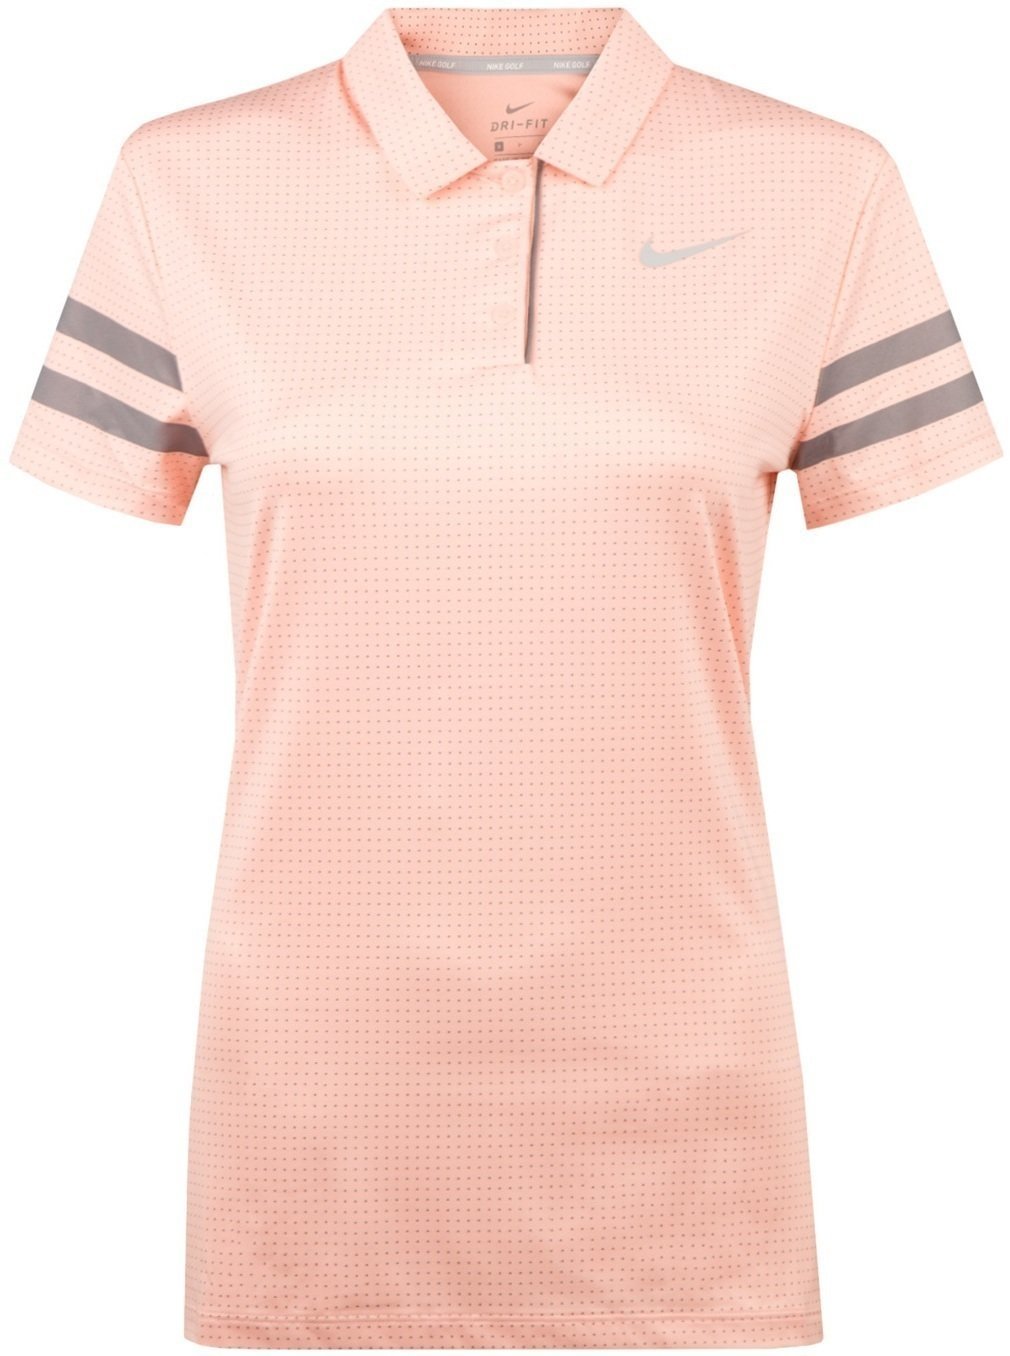 Chemise polo Nike Dri-Fit Printed Polo Golf Femme Storm Pink/Anthracite/White XS